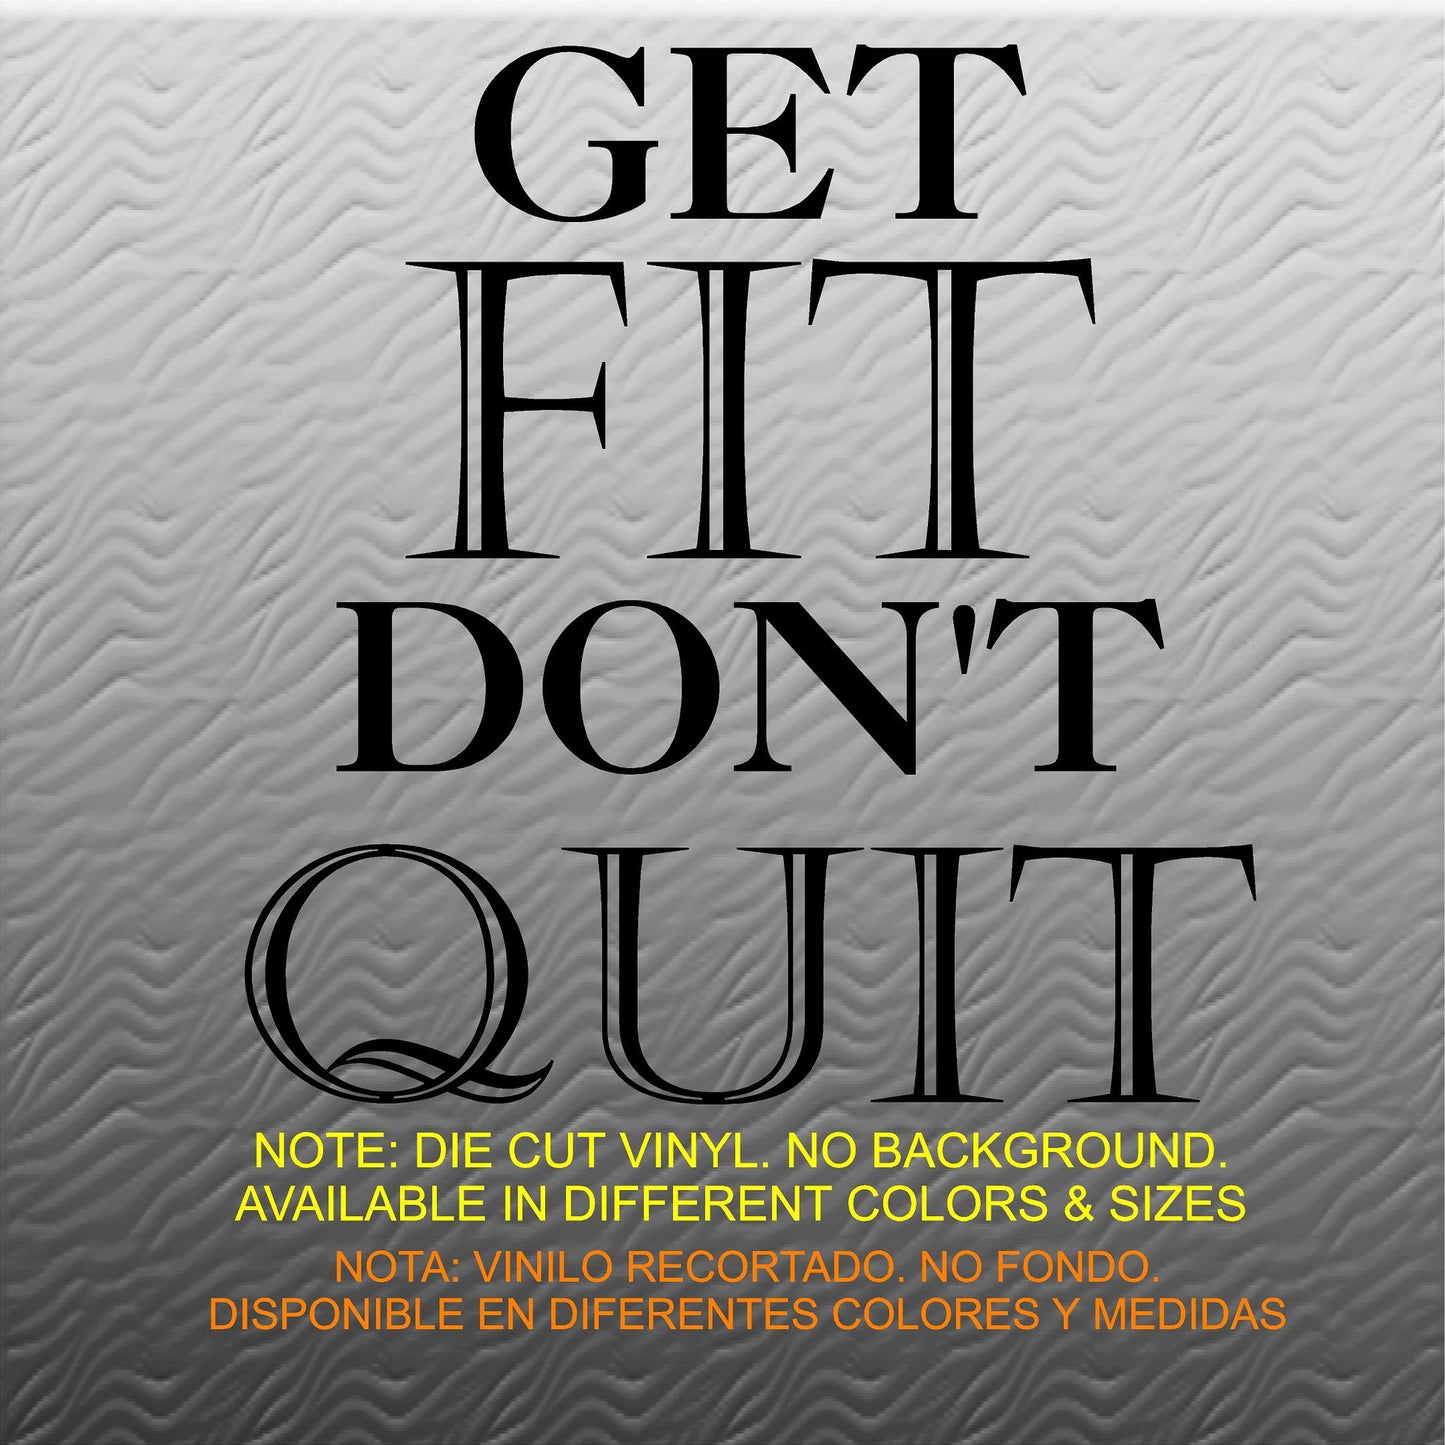 Stickers. Vinyl Wall Decal. Fitness. Gym. Exercise:  Get Fit. Don't Quit.